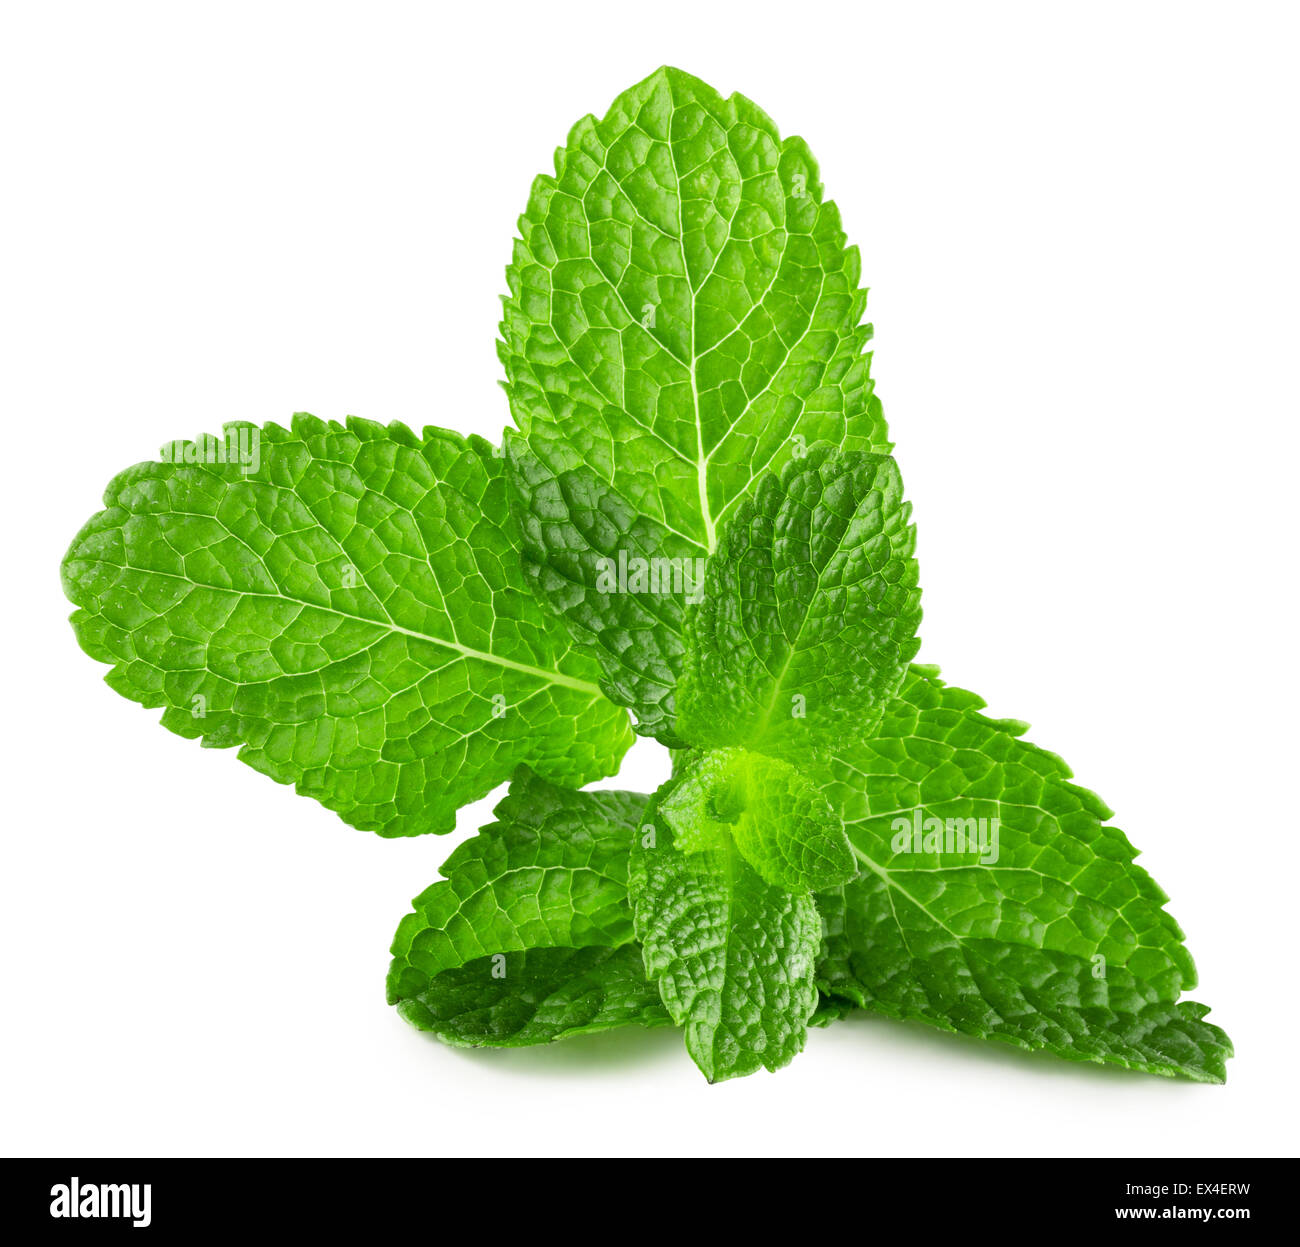 mint leaves isolated on the white background. Stock Photo